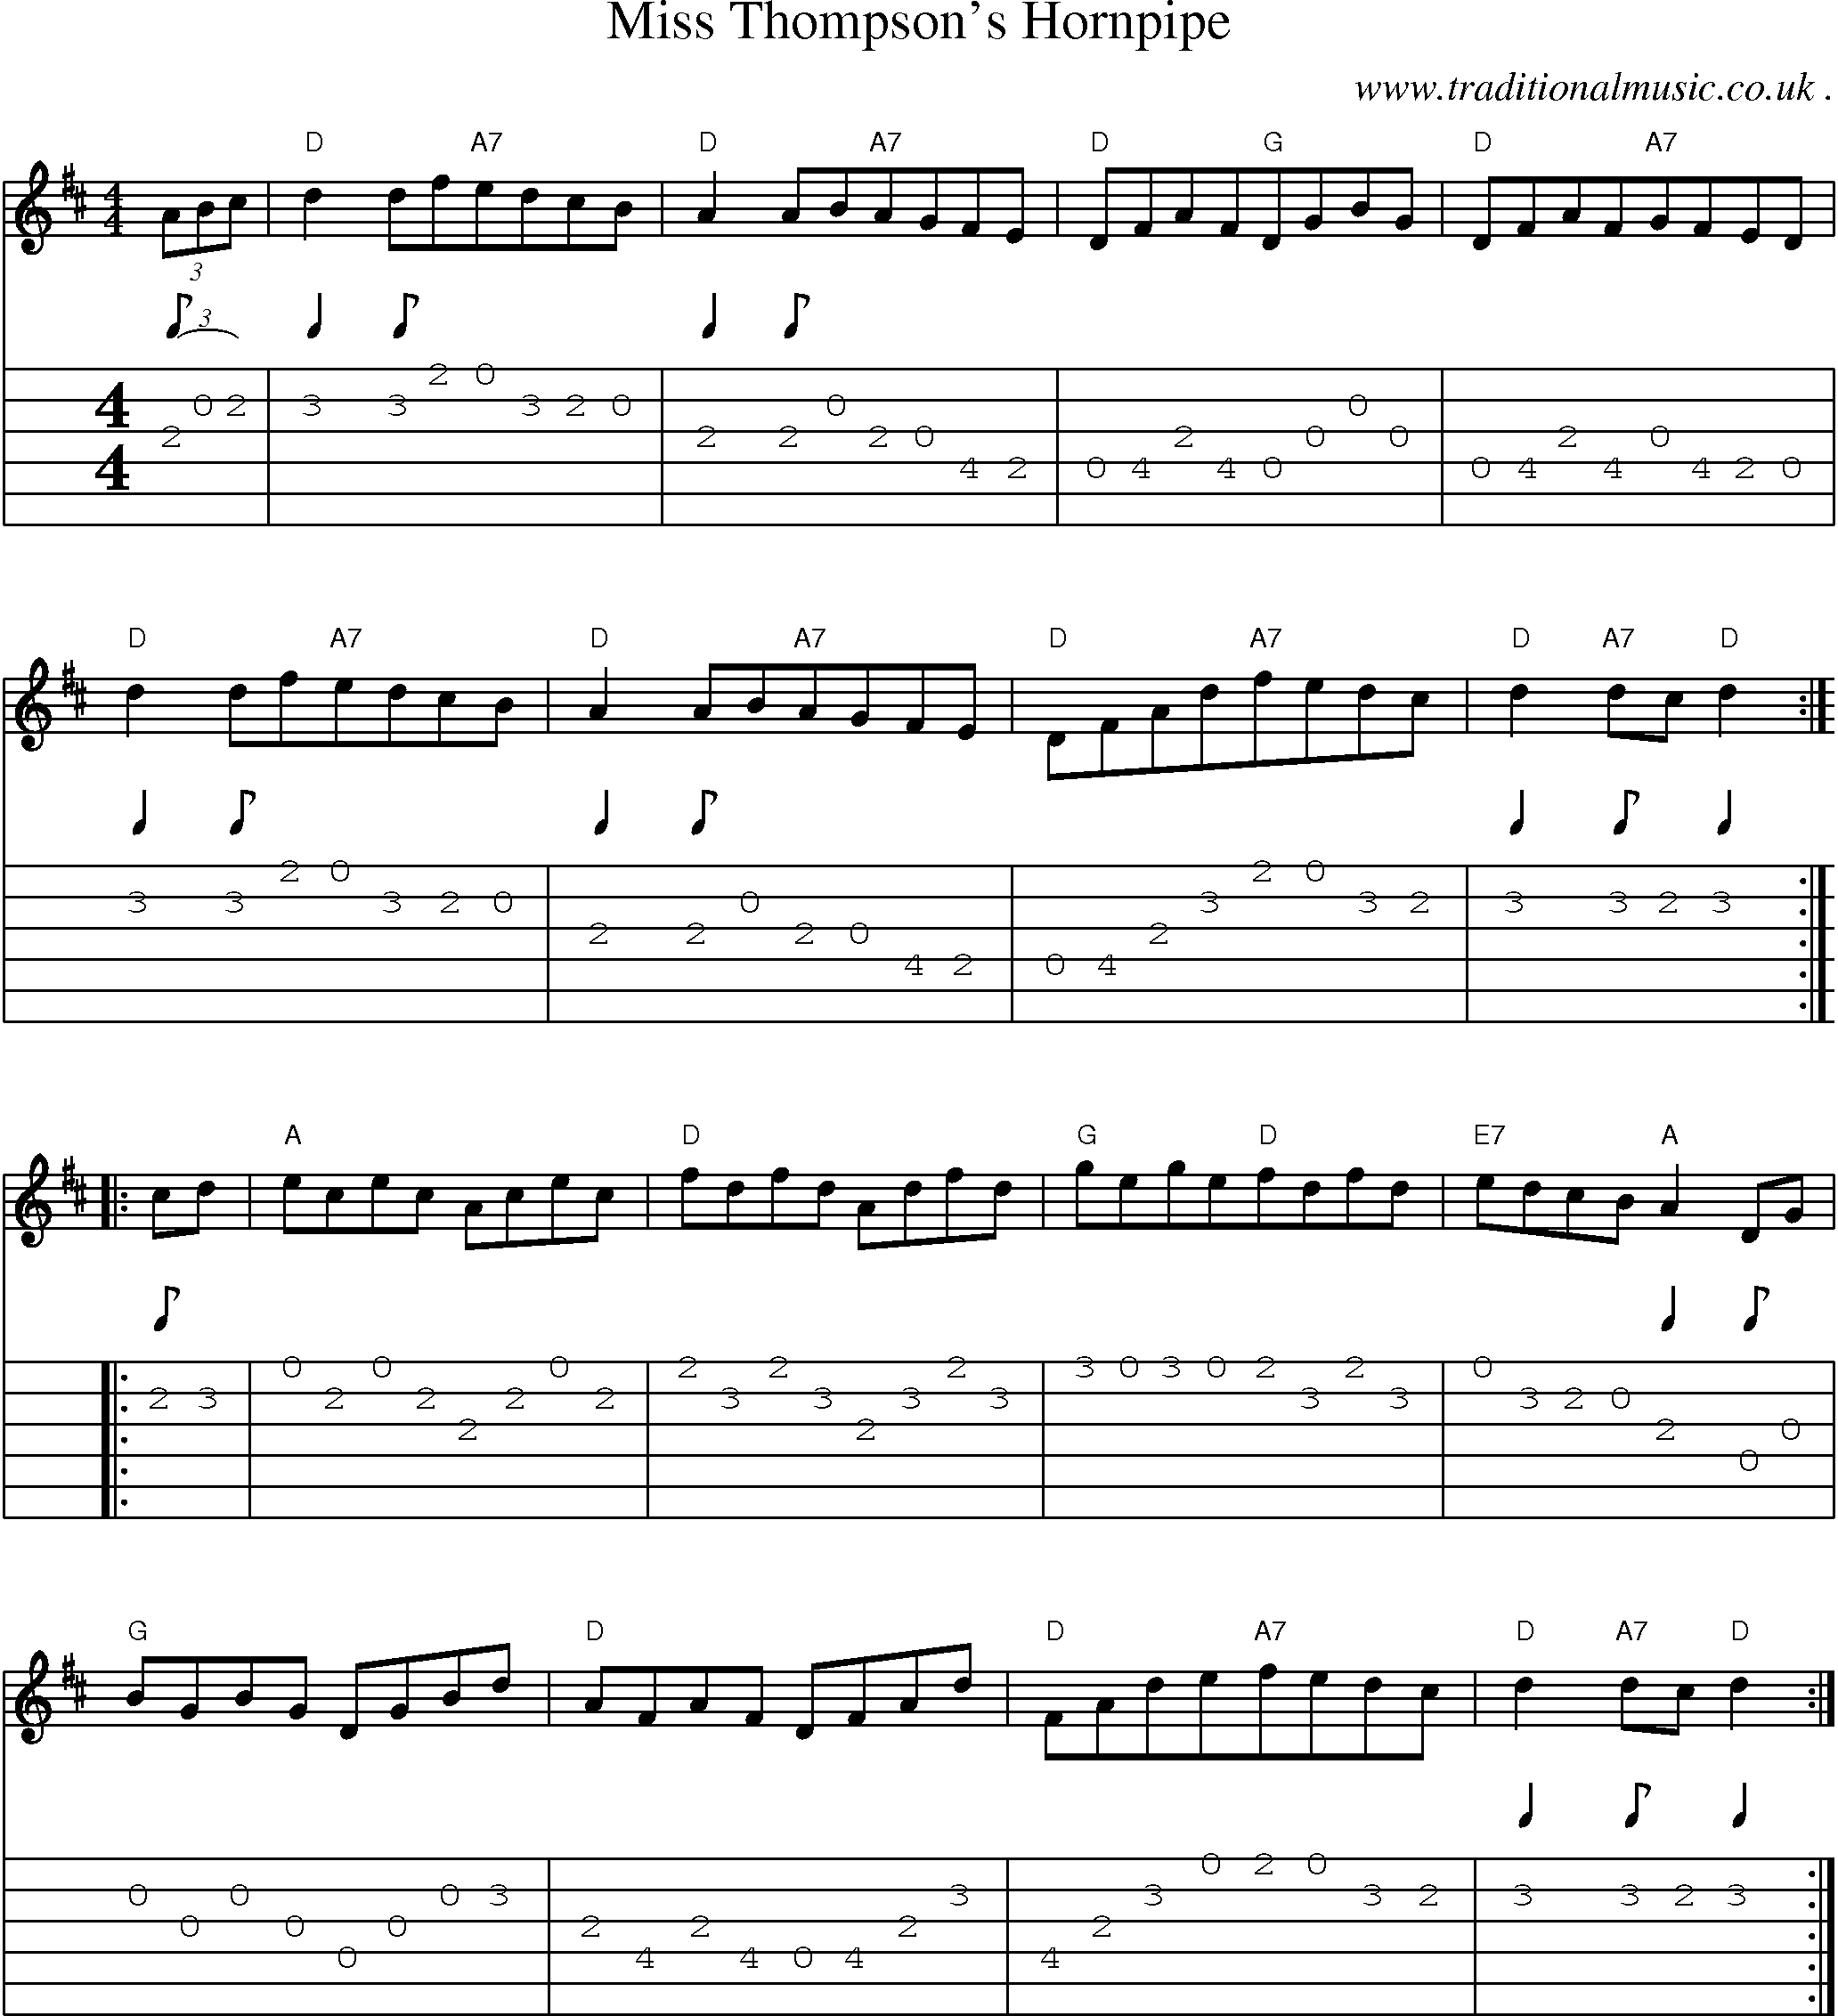 Sheet-Music and Guitar Tabs for Miss Thompsons Hornpipe